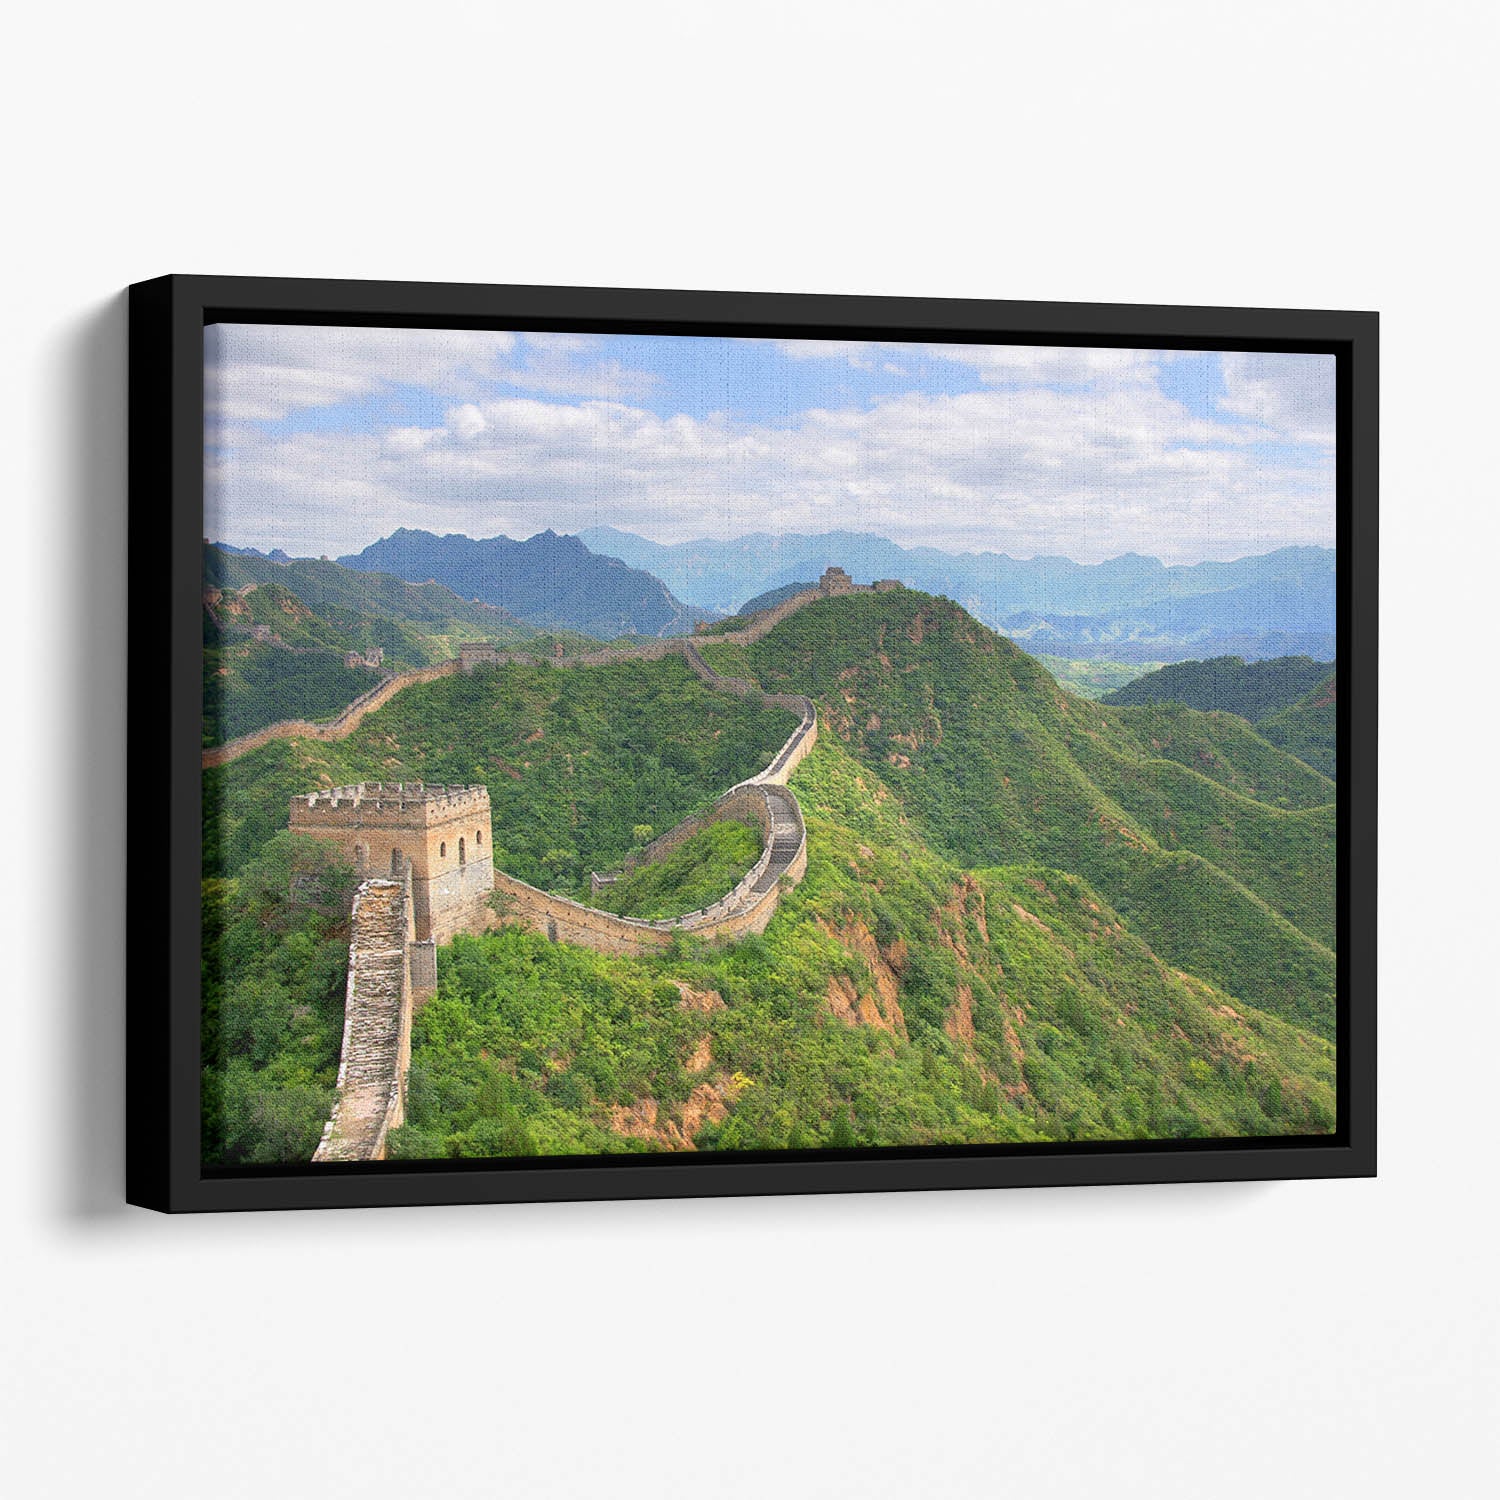 Beijing Great Wall of China Floating Framed Canvas